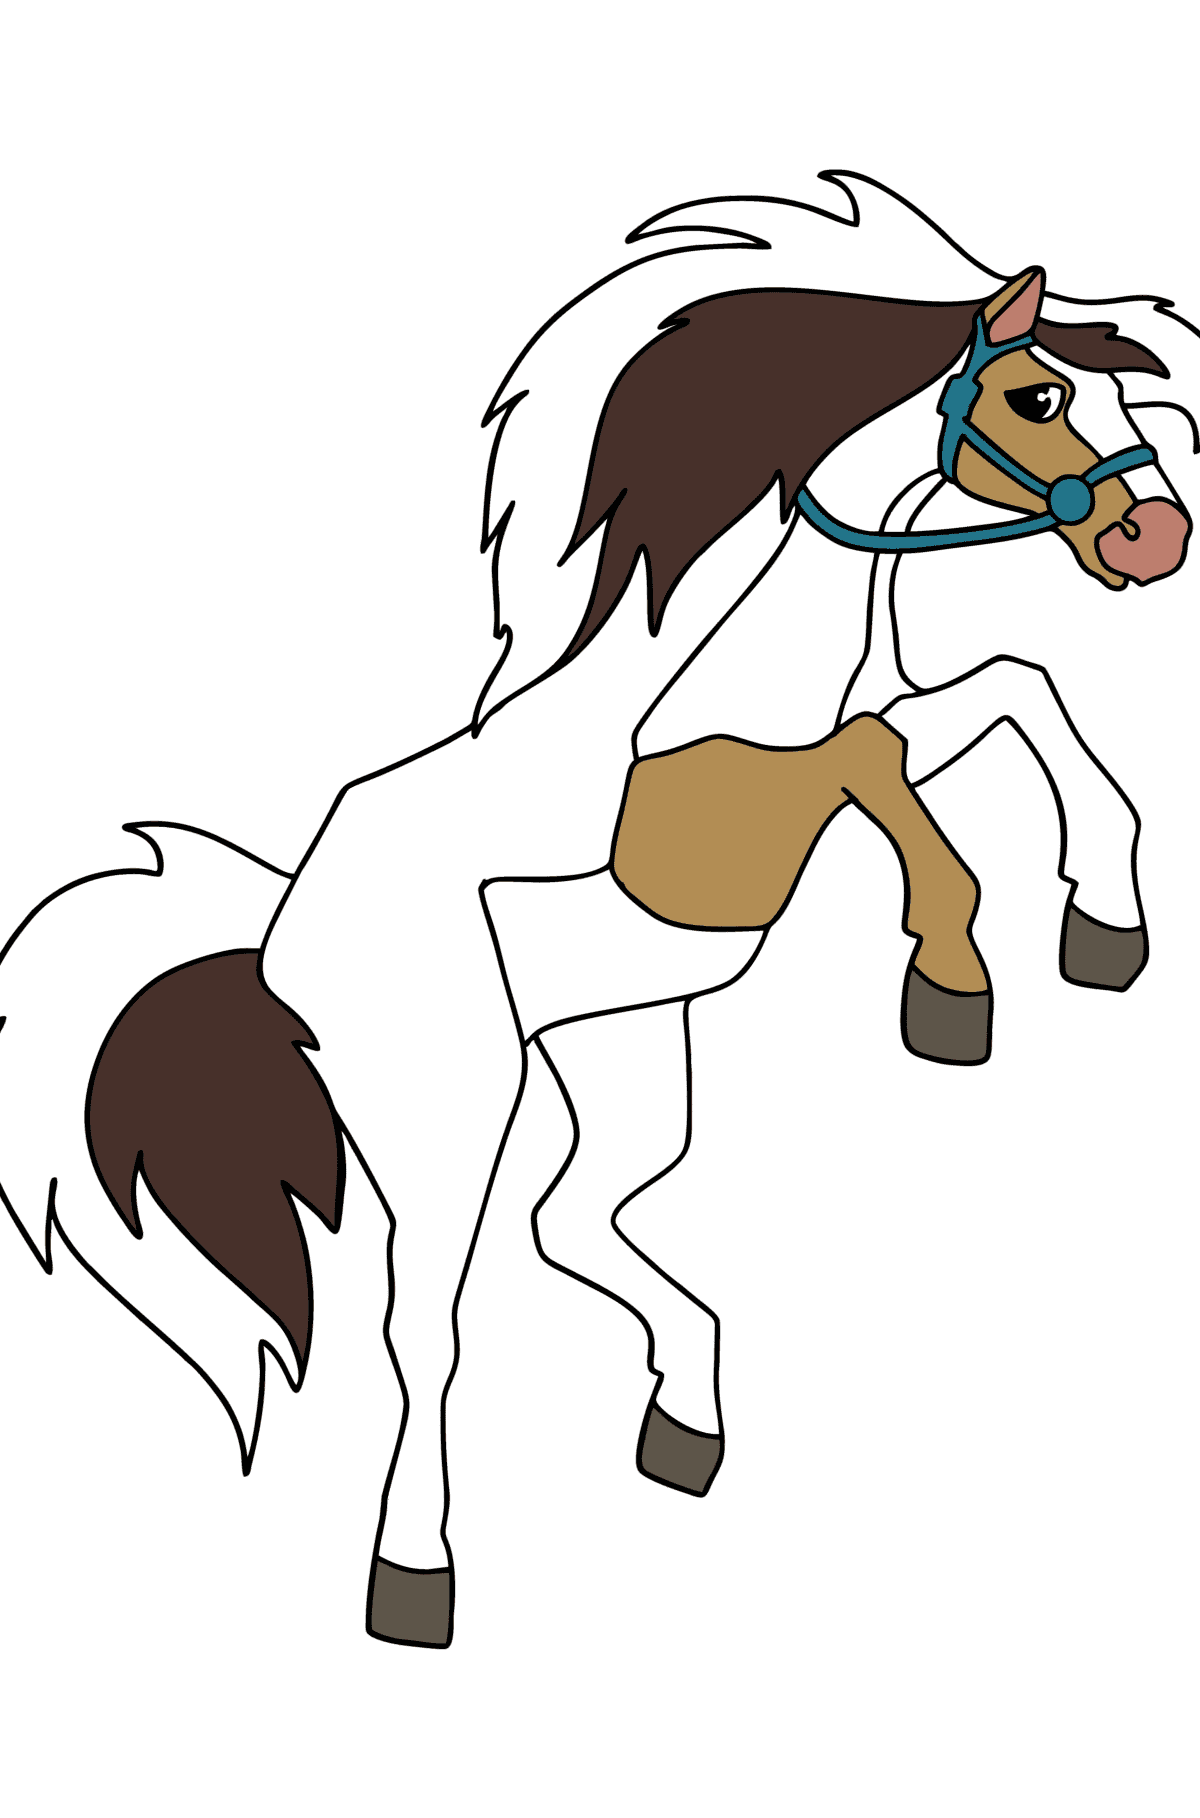 Galloping horse сoloring page - Coloring Pages for Kids